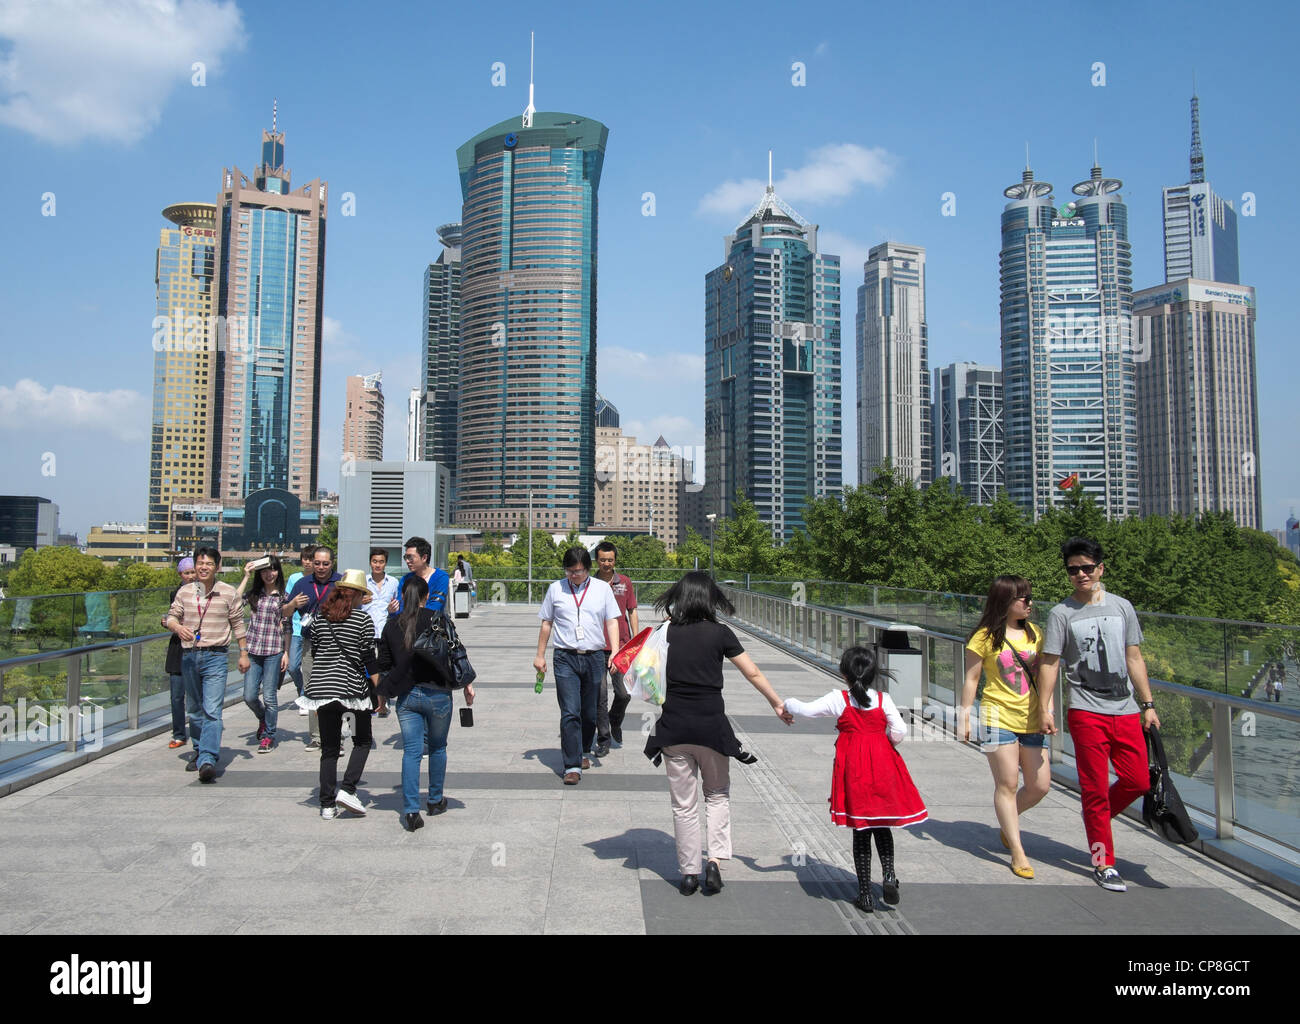 People walking on overhead walkway with skyline of skyscrapers in Lujiazui district of Pudong in Shanghai China Stock Photo